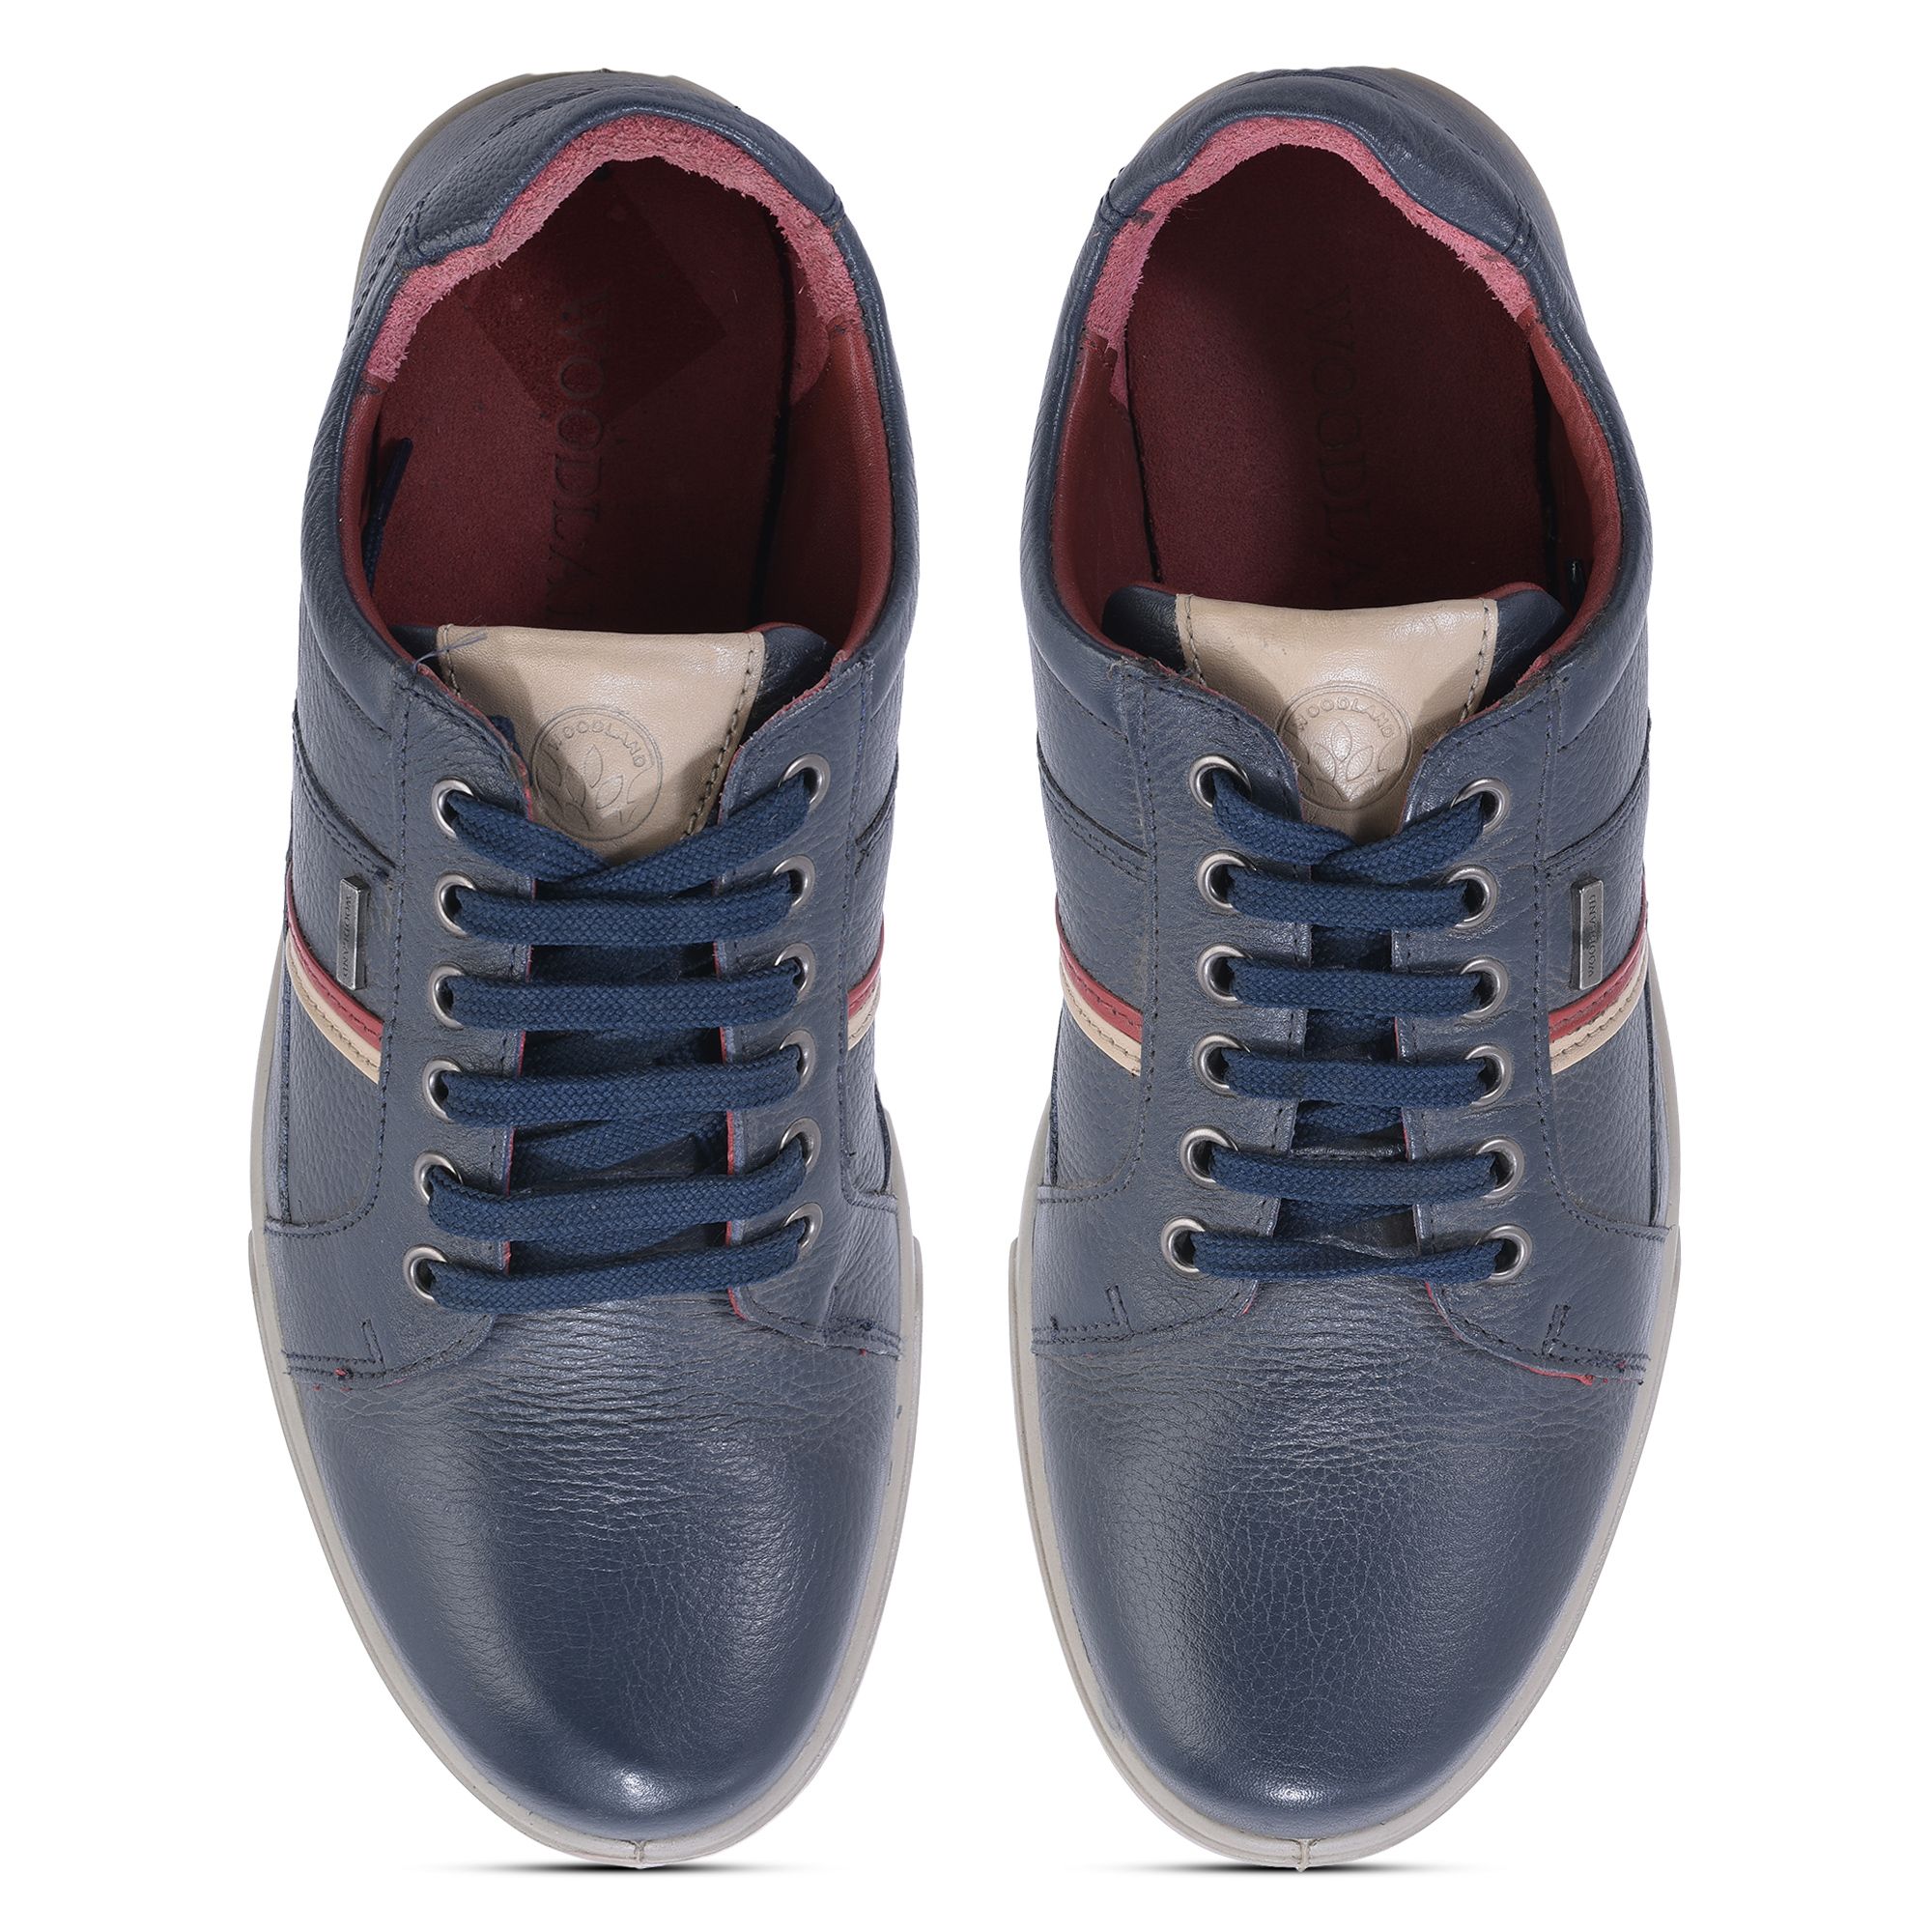 NAVY casual shoes